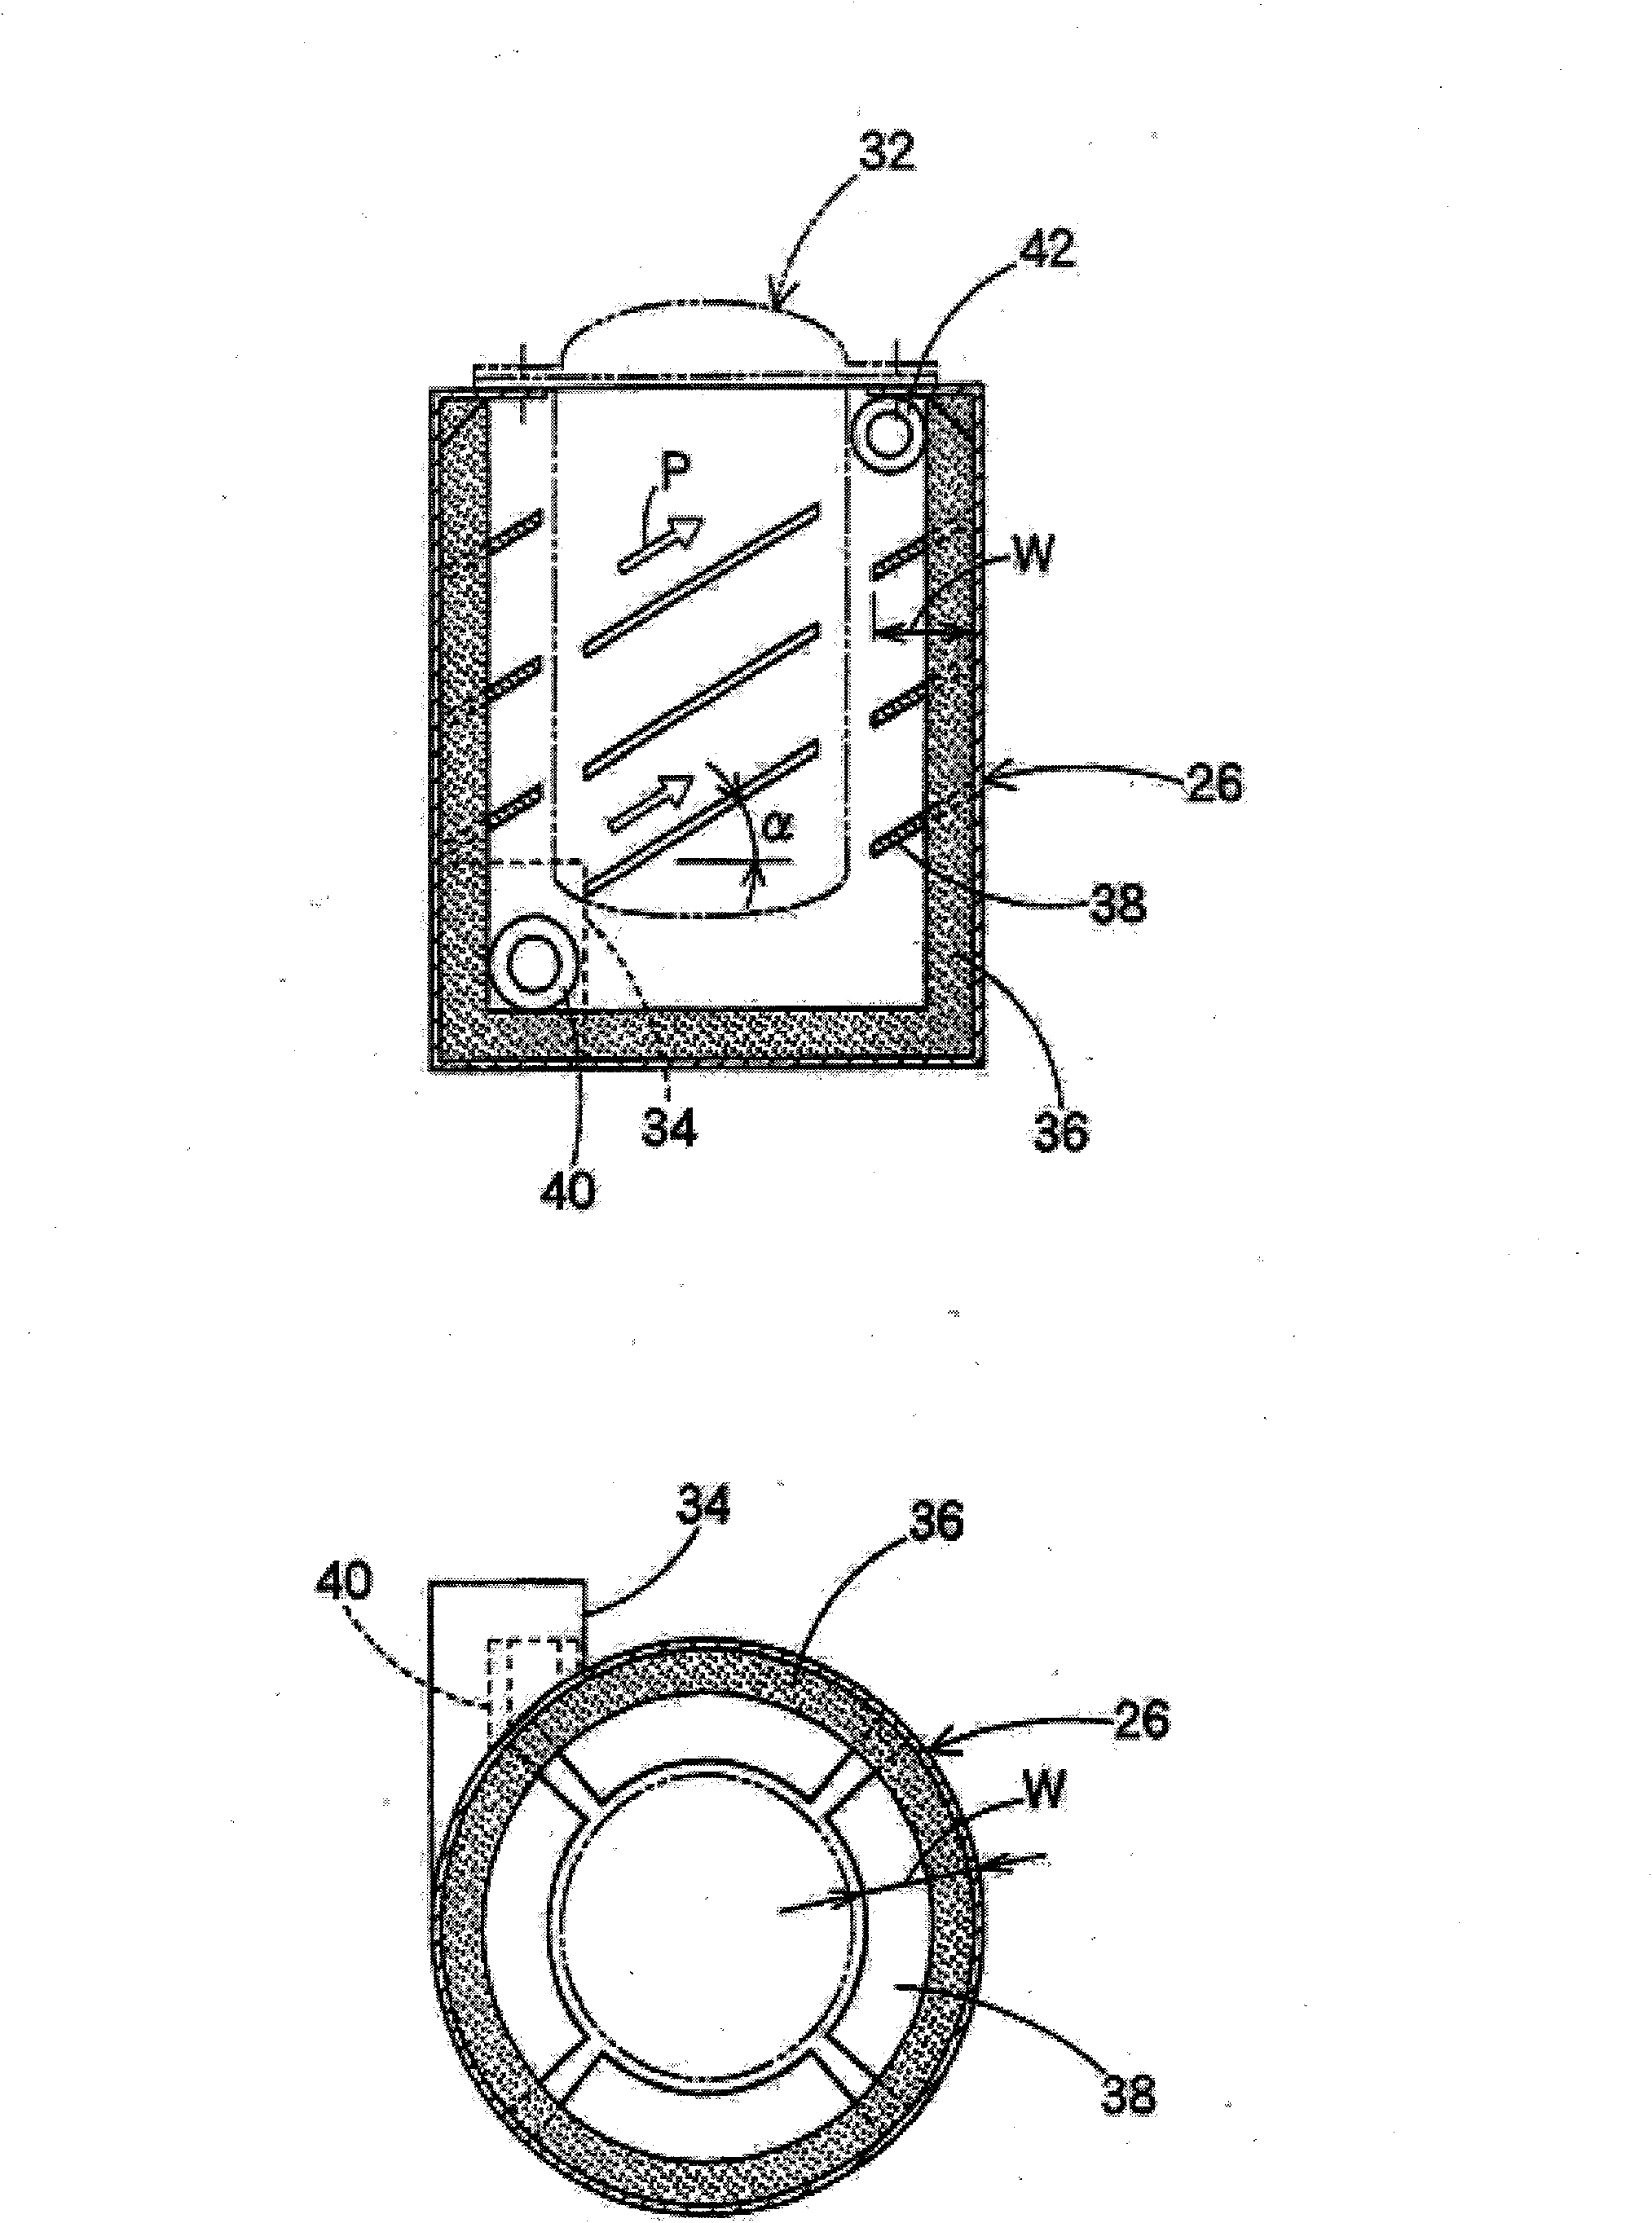 Innocent treatment and oily recovery device of polymer waste